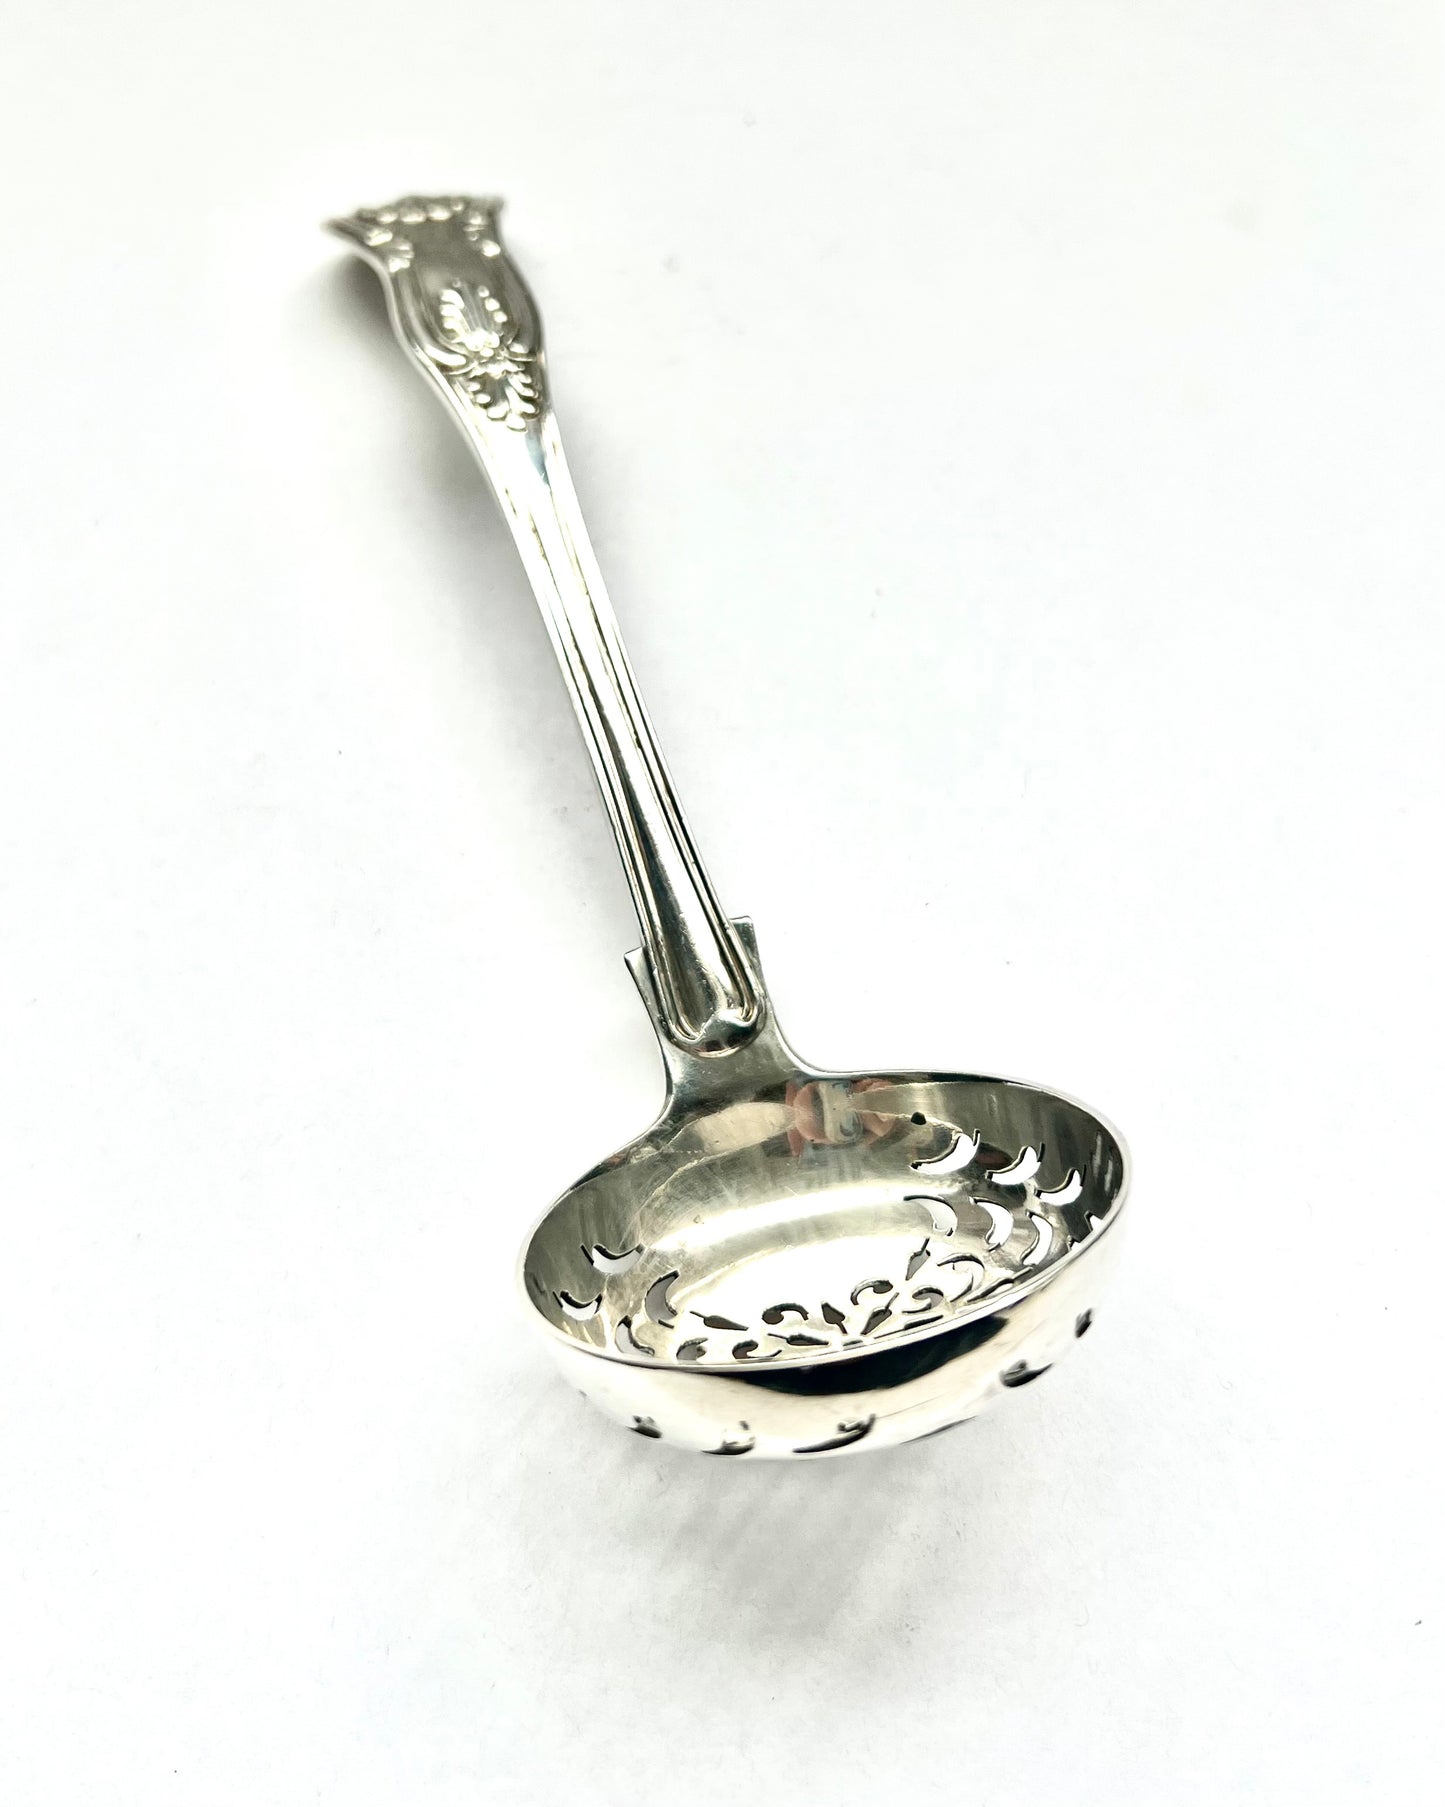 Antique High Victorian sterling silver sugar sifter, double struck in King’s Pattern. Marks for Francis Higgins II, London, 1861